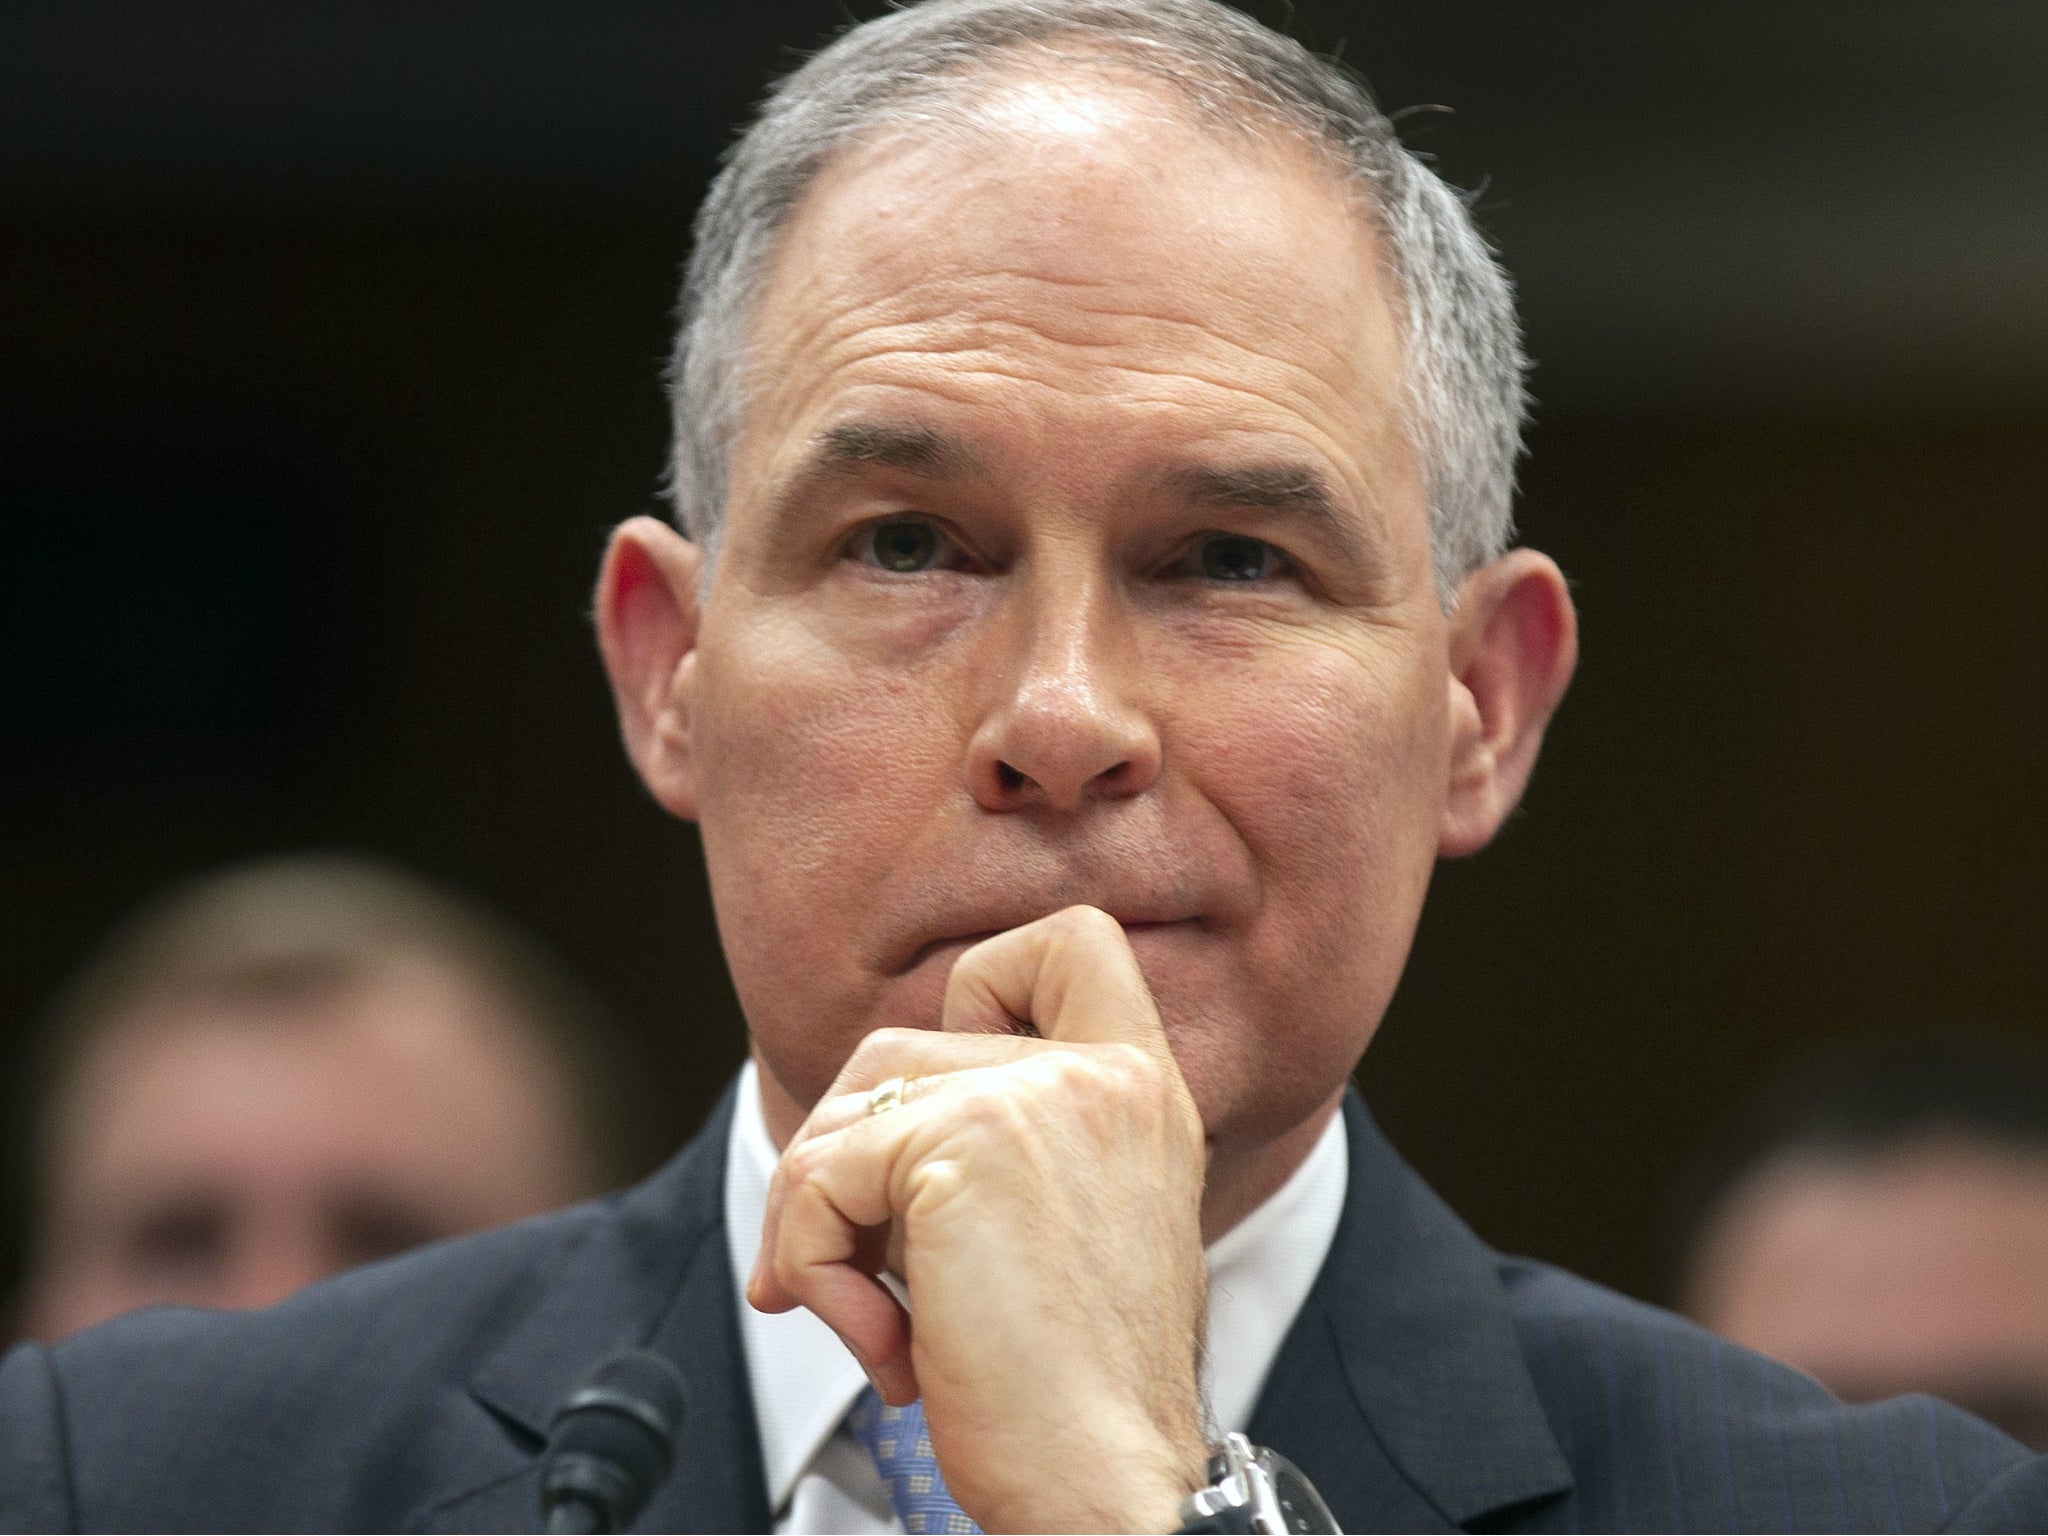 Environmental Protection Agency chief Scott Pruitt spent more than $4m on his security detail.